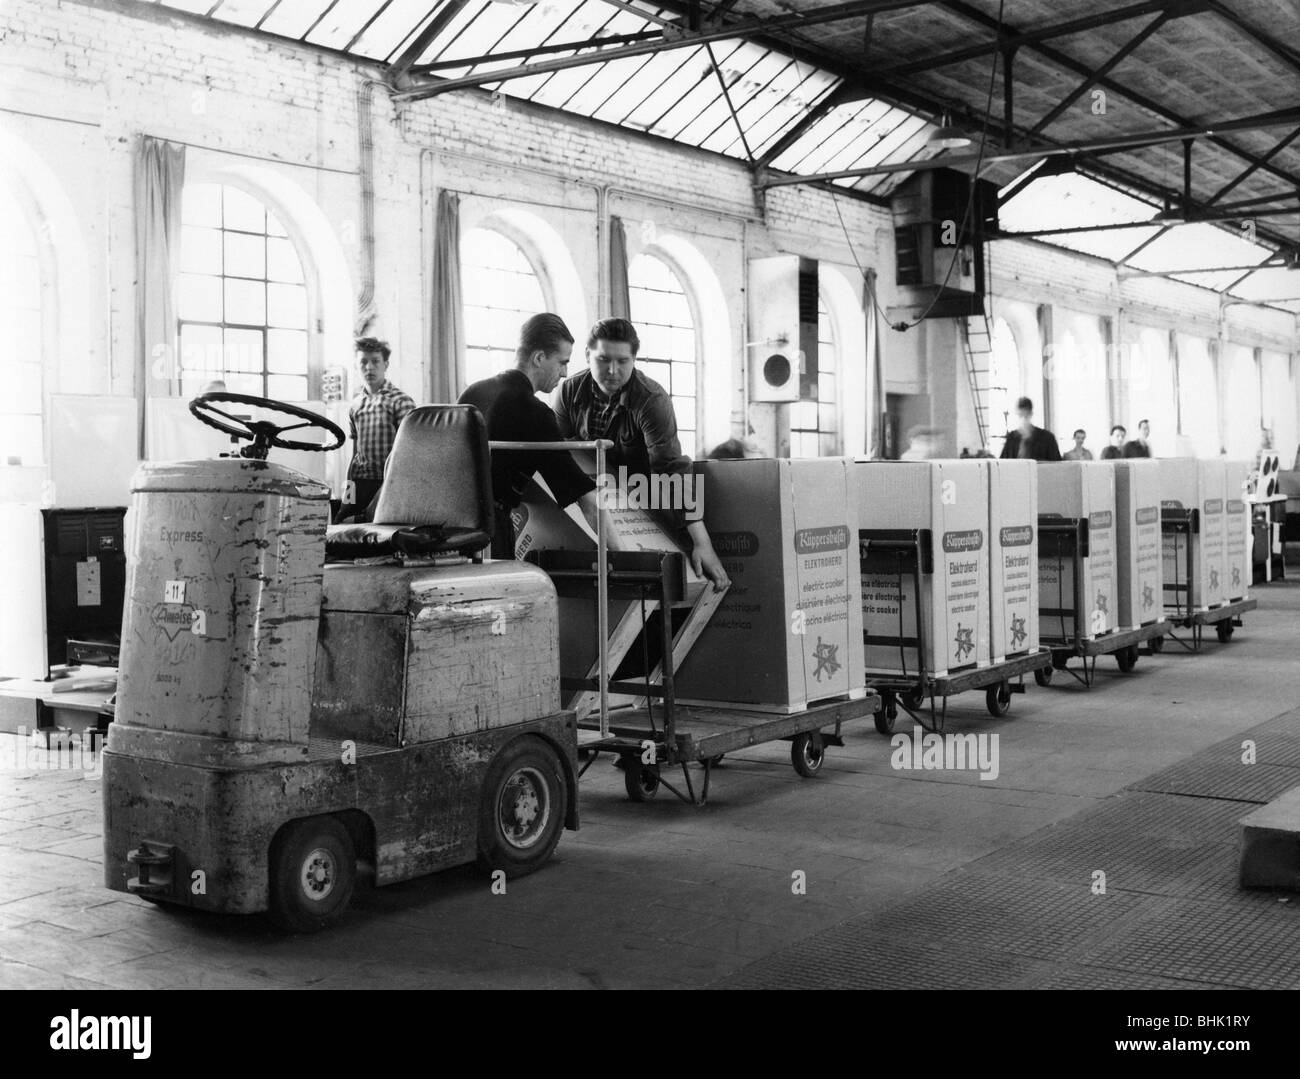 industry, factories, Kuepperbusch, worker loading up transport vehicle with boxes of electric range, Gelsenkirchen, Germany, circa 1960s, Stock Photo